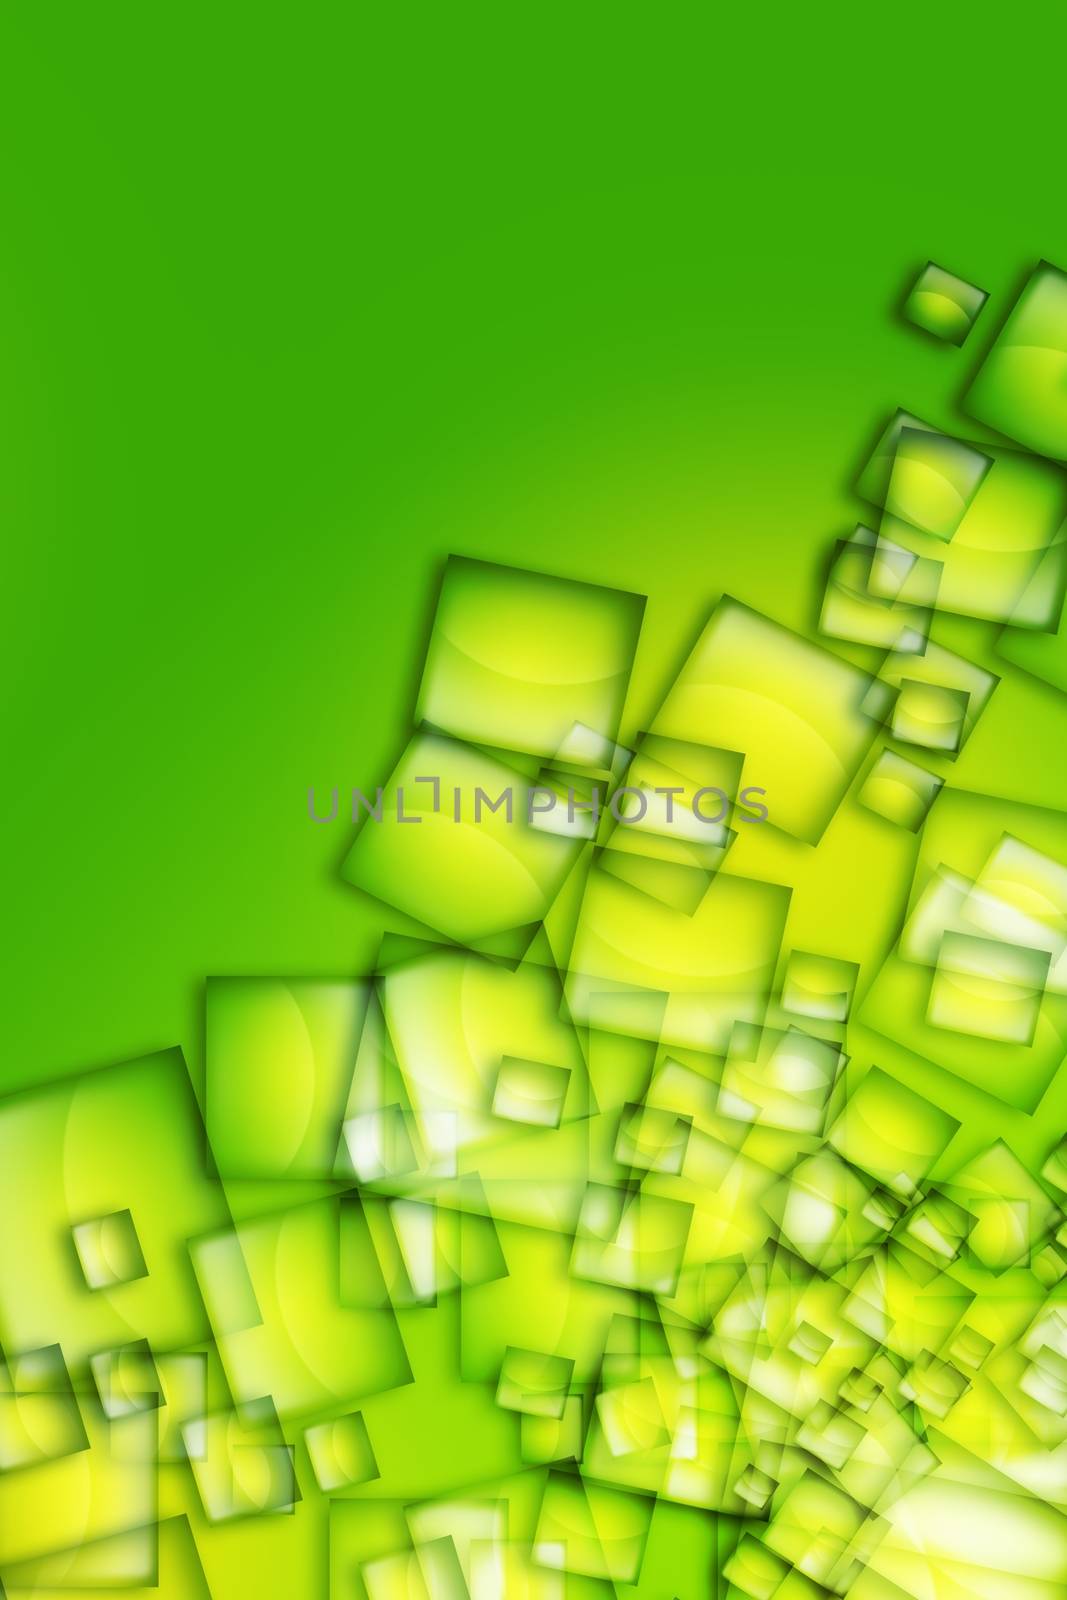 Green Boxes Abstract Yellow-Green Background. Multiply Transparent Boxes. Vertical Background Design. 